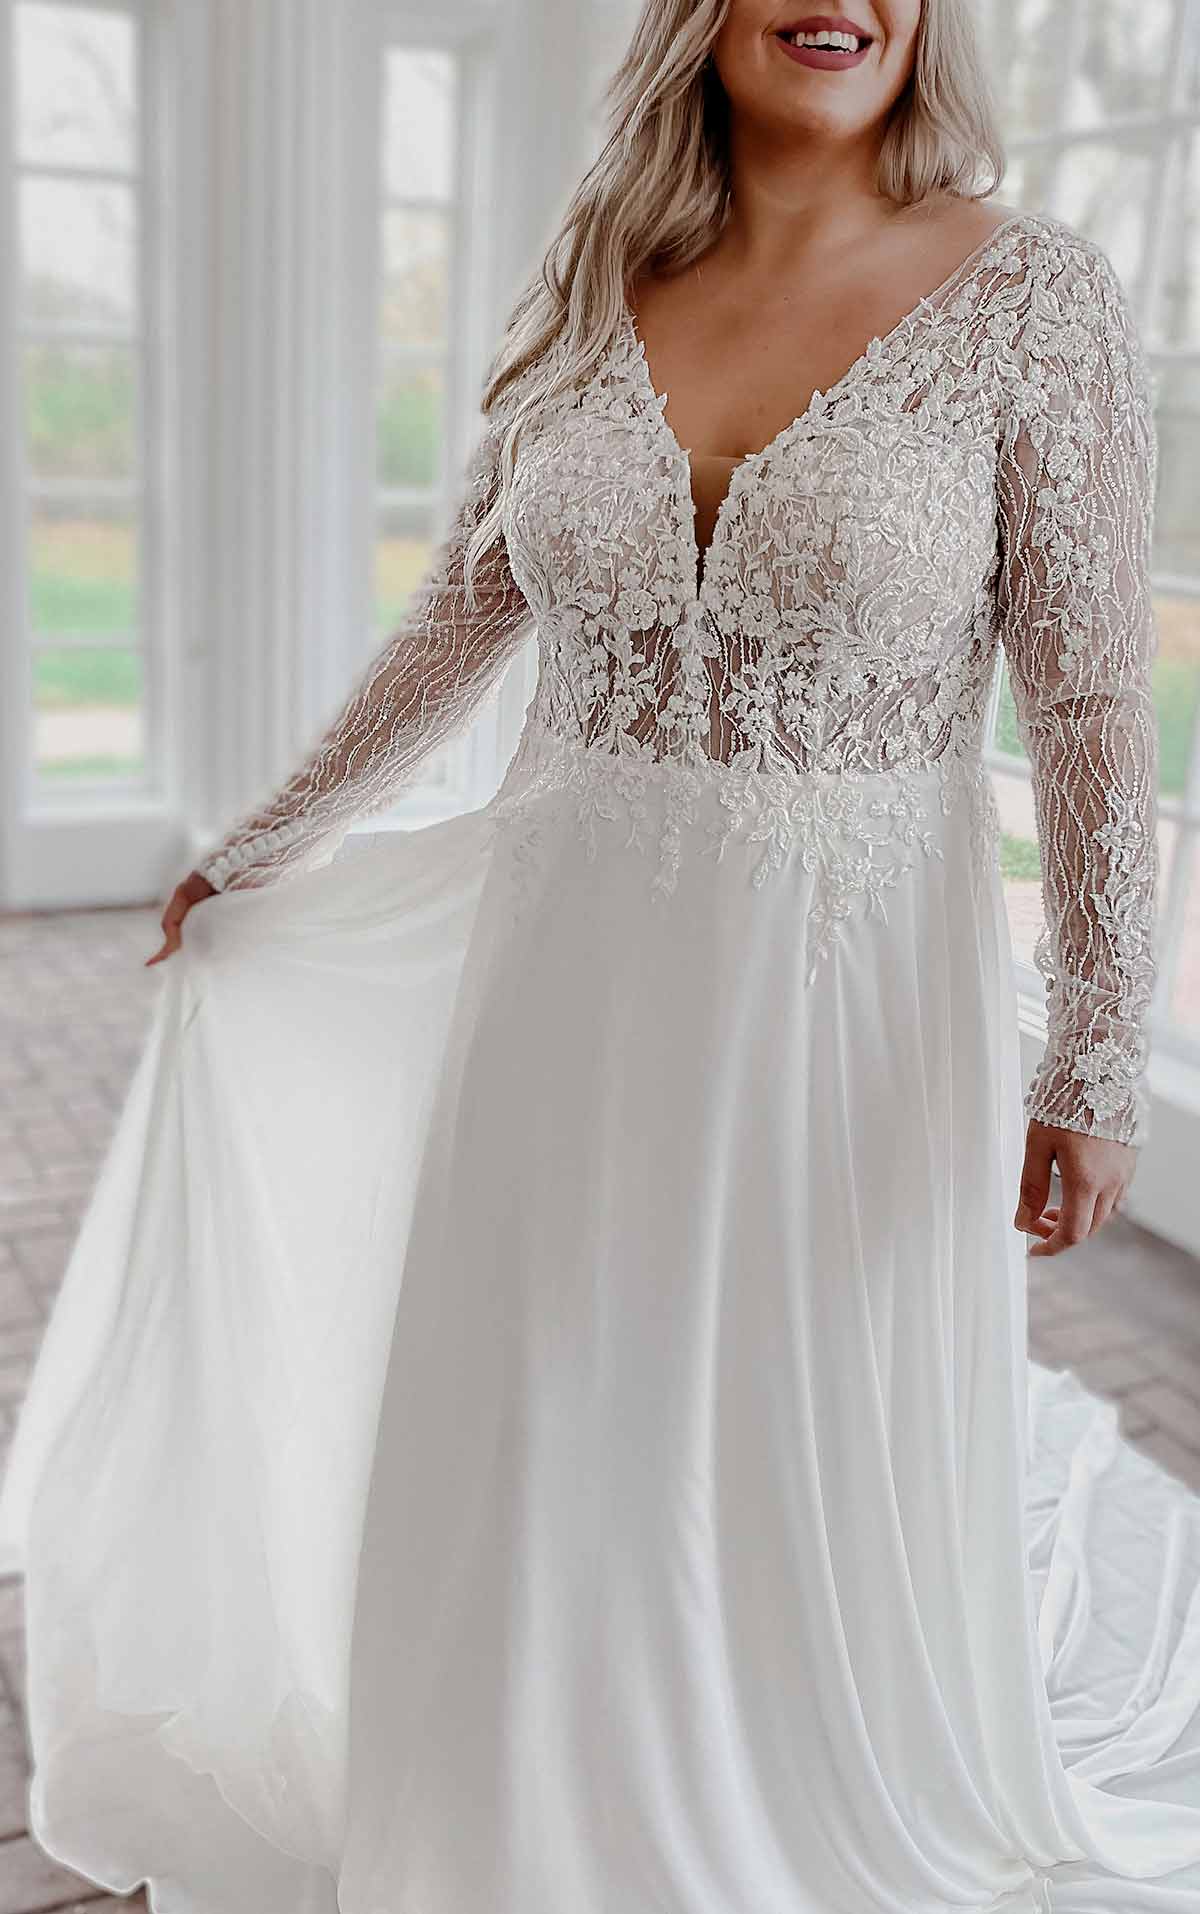 Modern Mixed fabric Wedding Dress With Lace And Long Sleeves ...